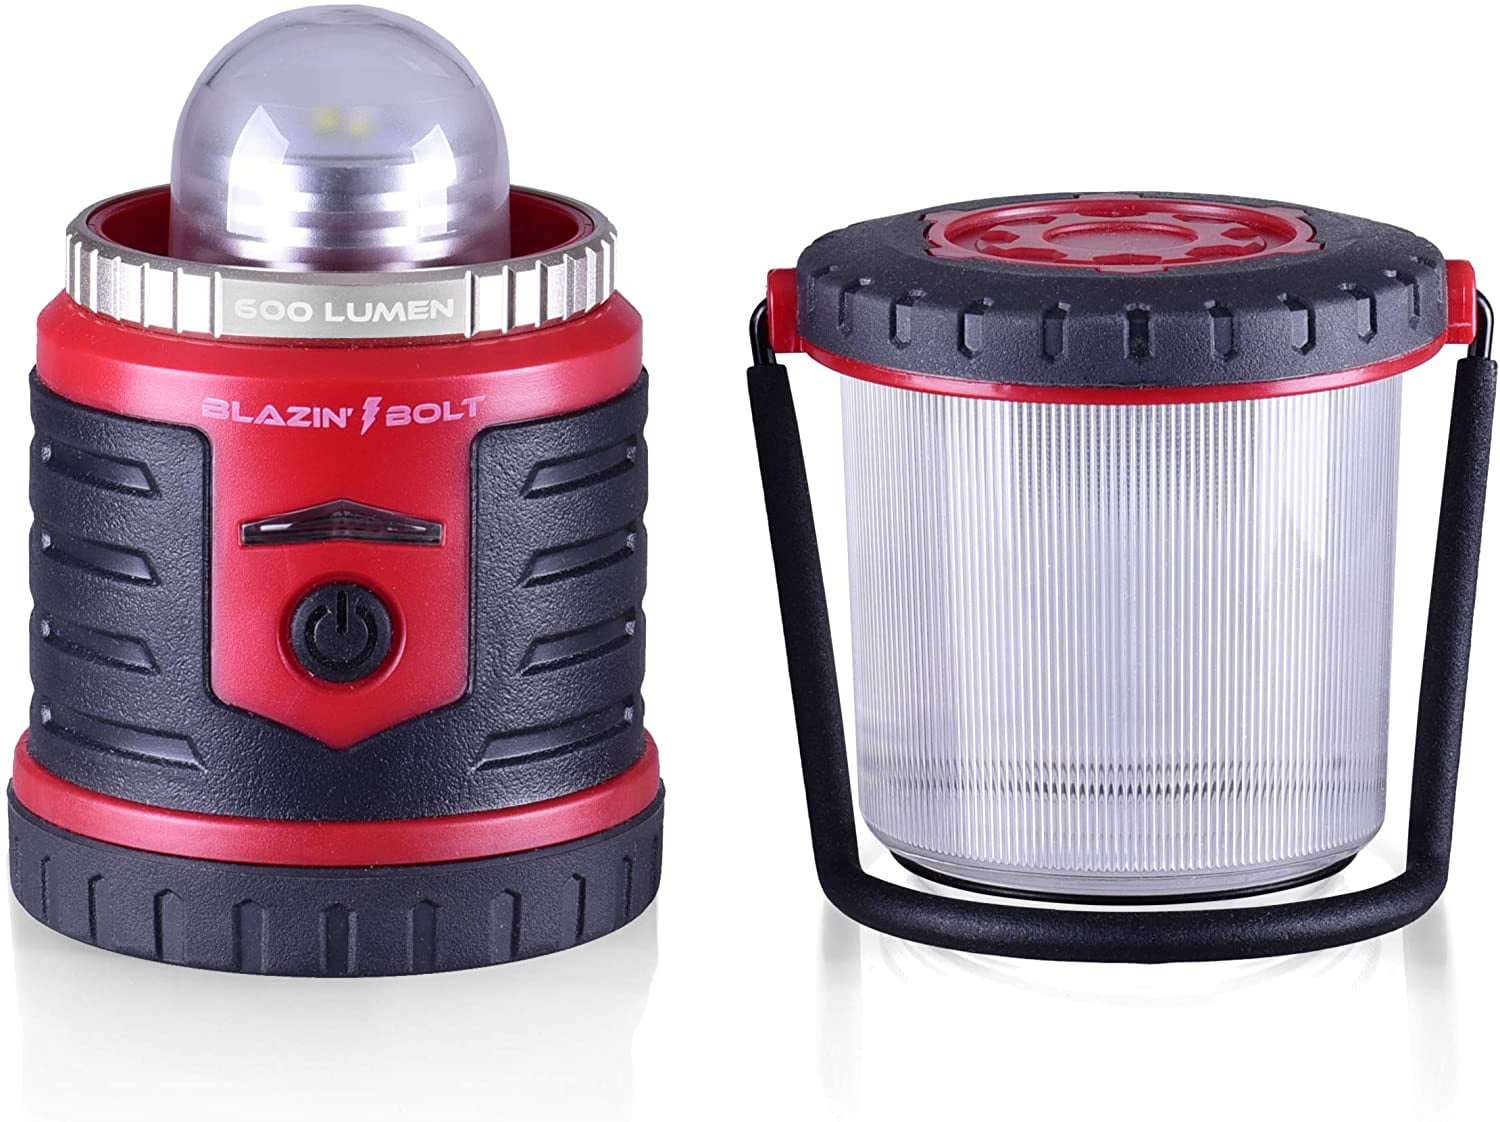 400 Hour Runtime 400 Lumen, Green Emergency Blazin Bison Brightest Rechargeable LED Lantern Hurricane Phone Charger Storm